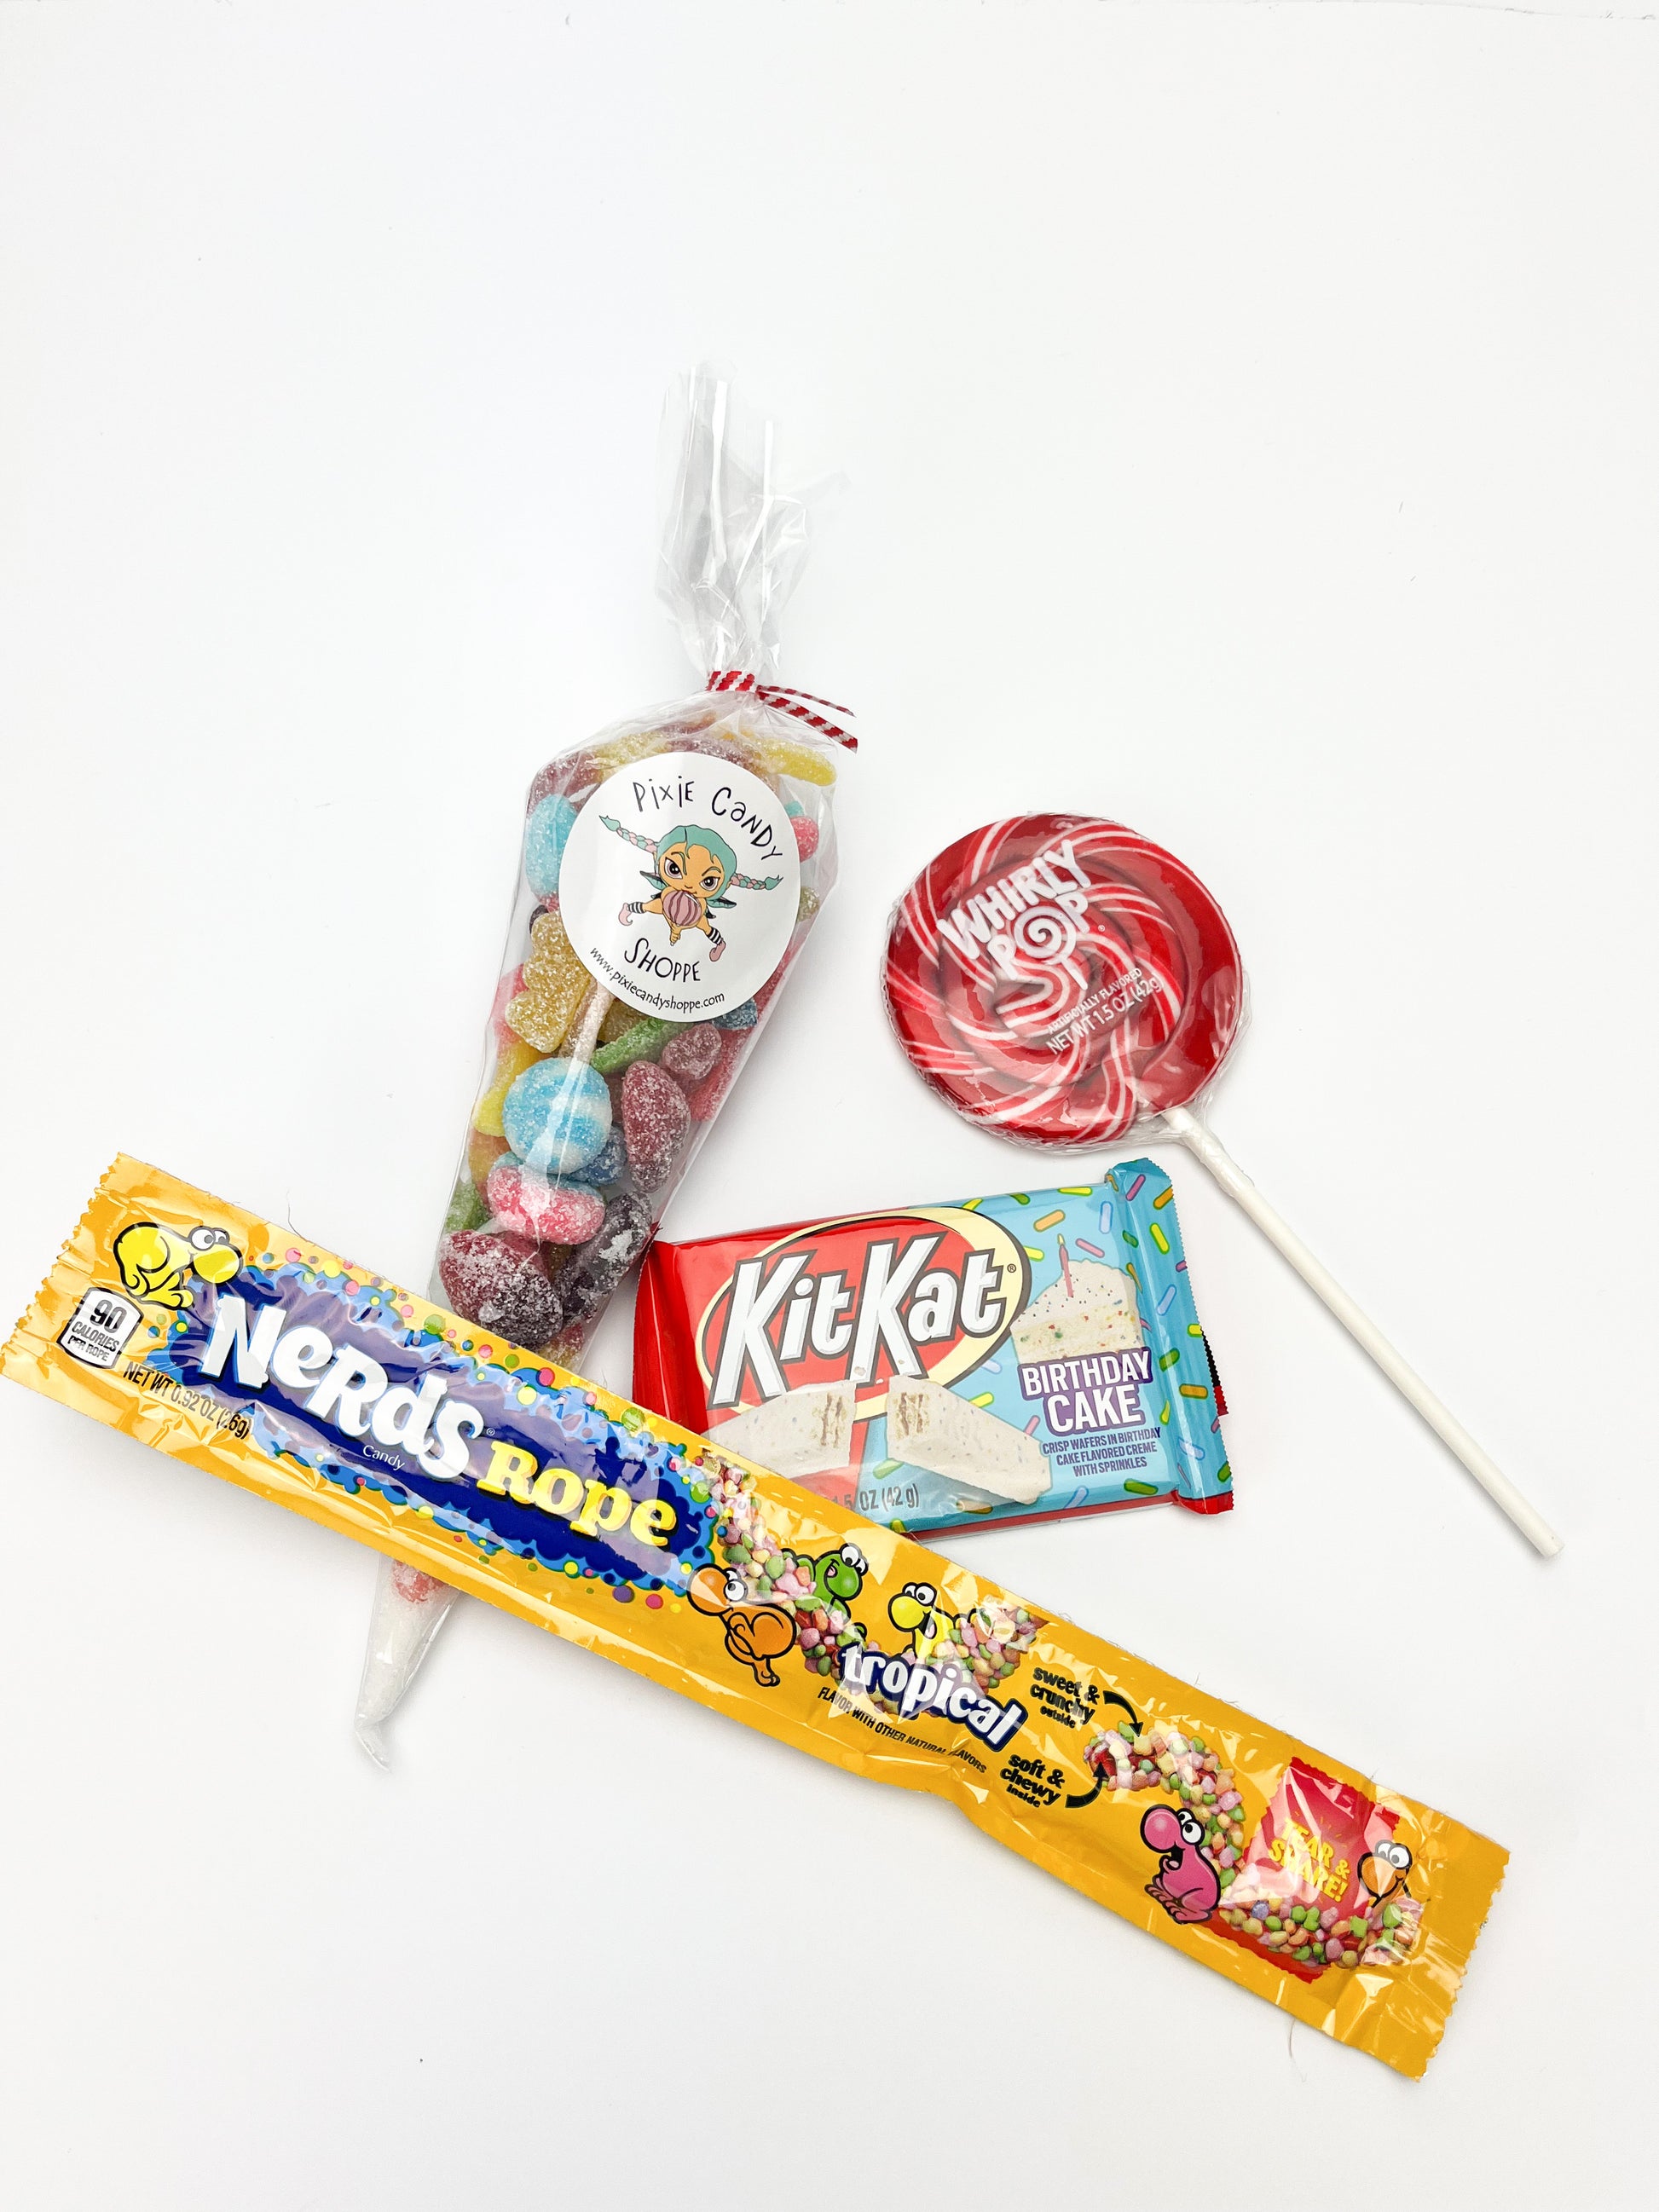 A nerds rope candy, birthday cake kitkat bar, whirly pop, and clear bag of sour candies displayed on a white background.